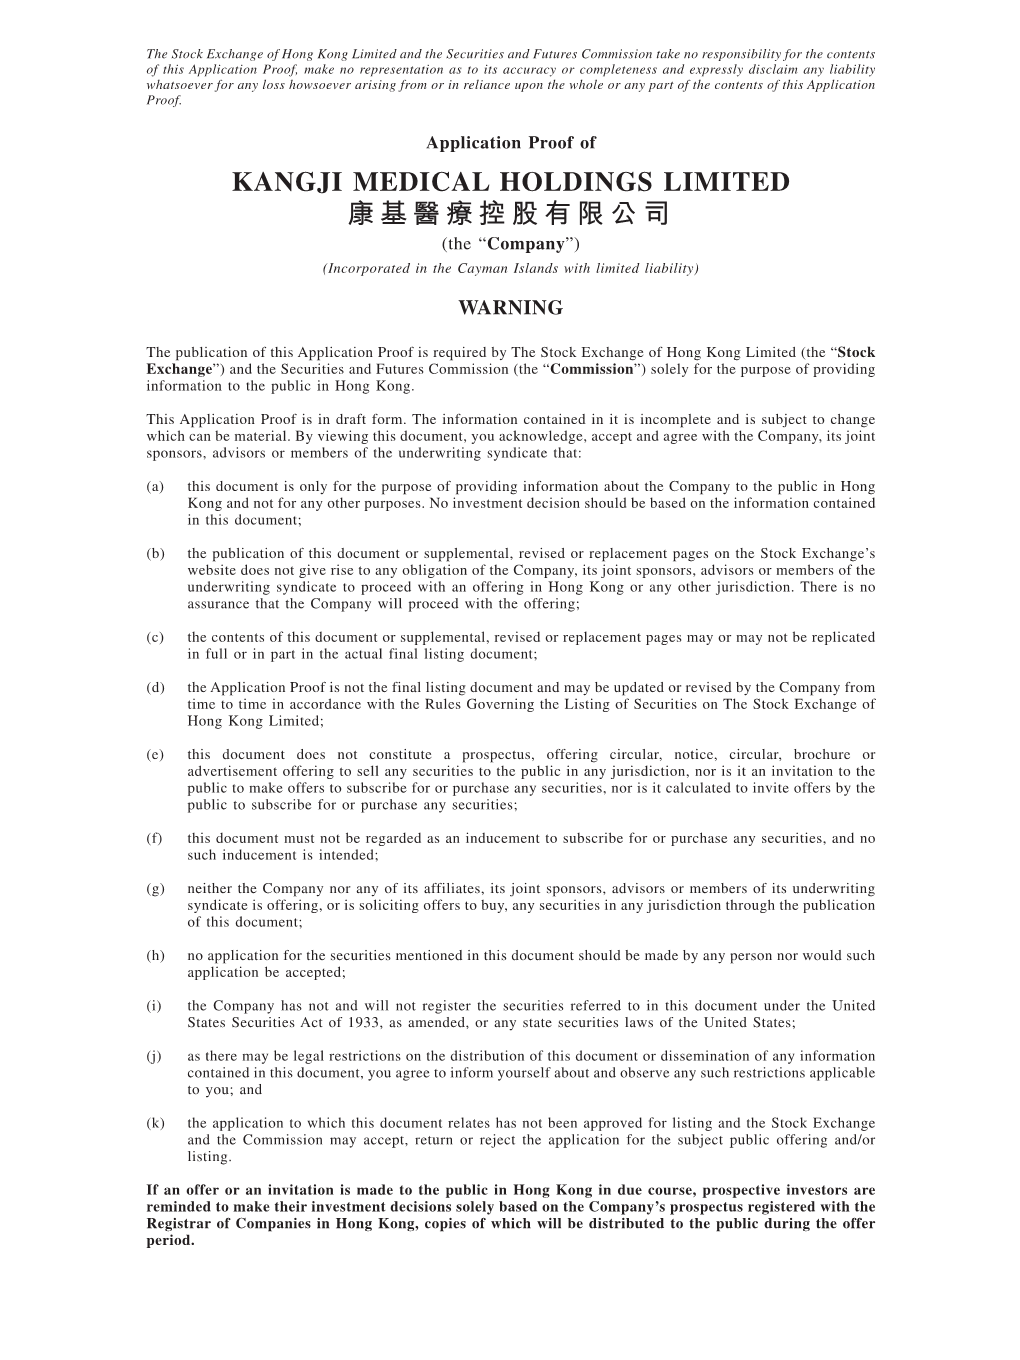 KANGJI MEDICAL HOLDINGS LIMITED 康基醫療控股有限公司 (The “Company”) (Incorporated in the Cayman Islands with Limited Liability)